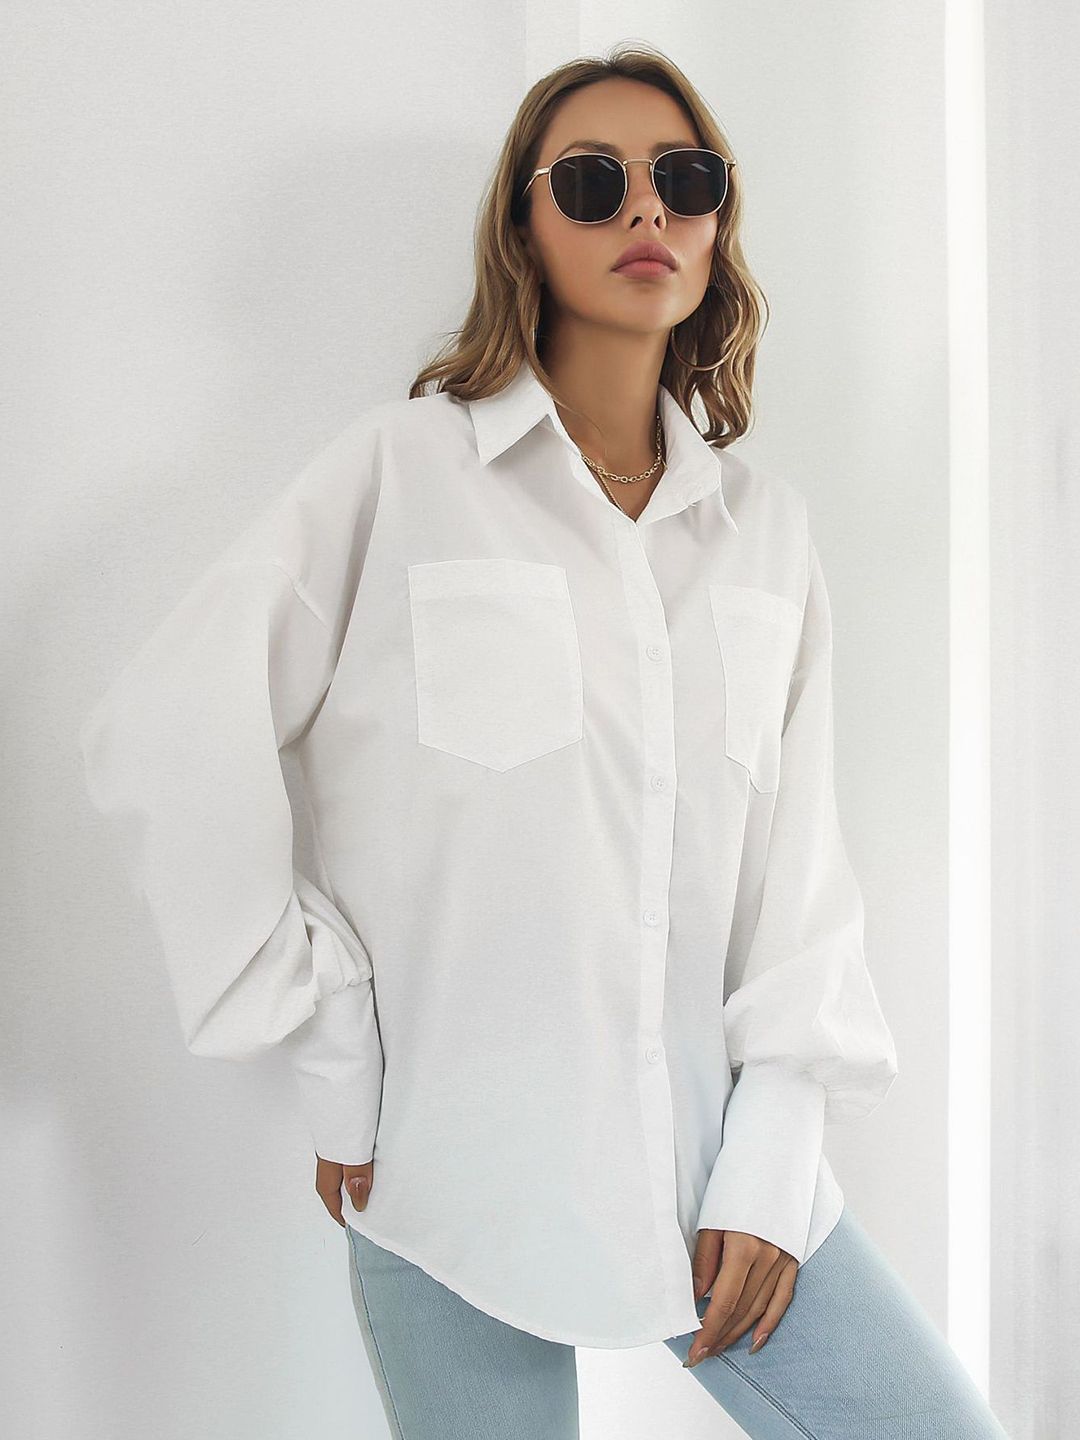 StyleCast Women White Extended Sleeves Shirt Style Longline Top Price in India